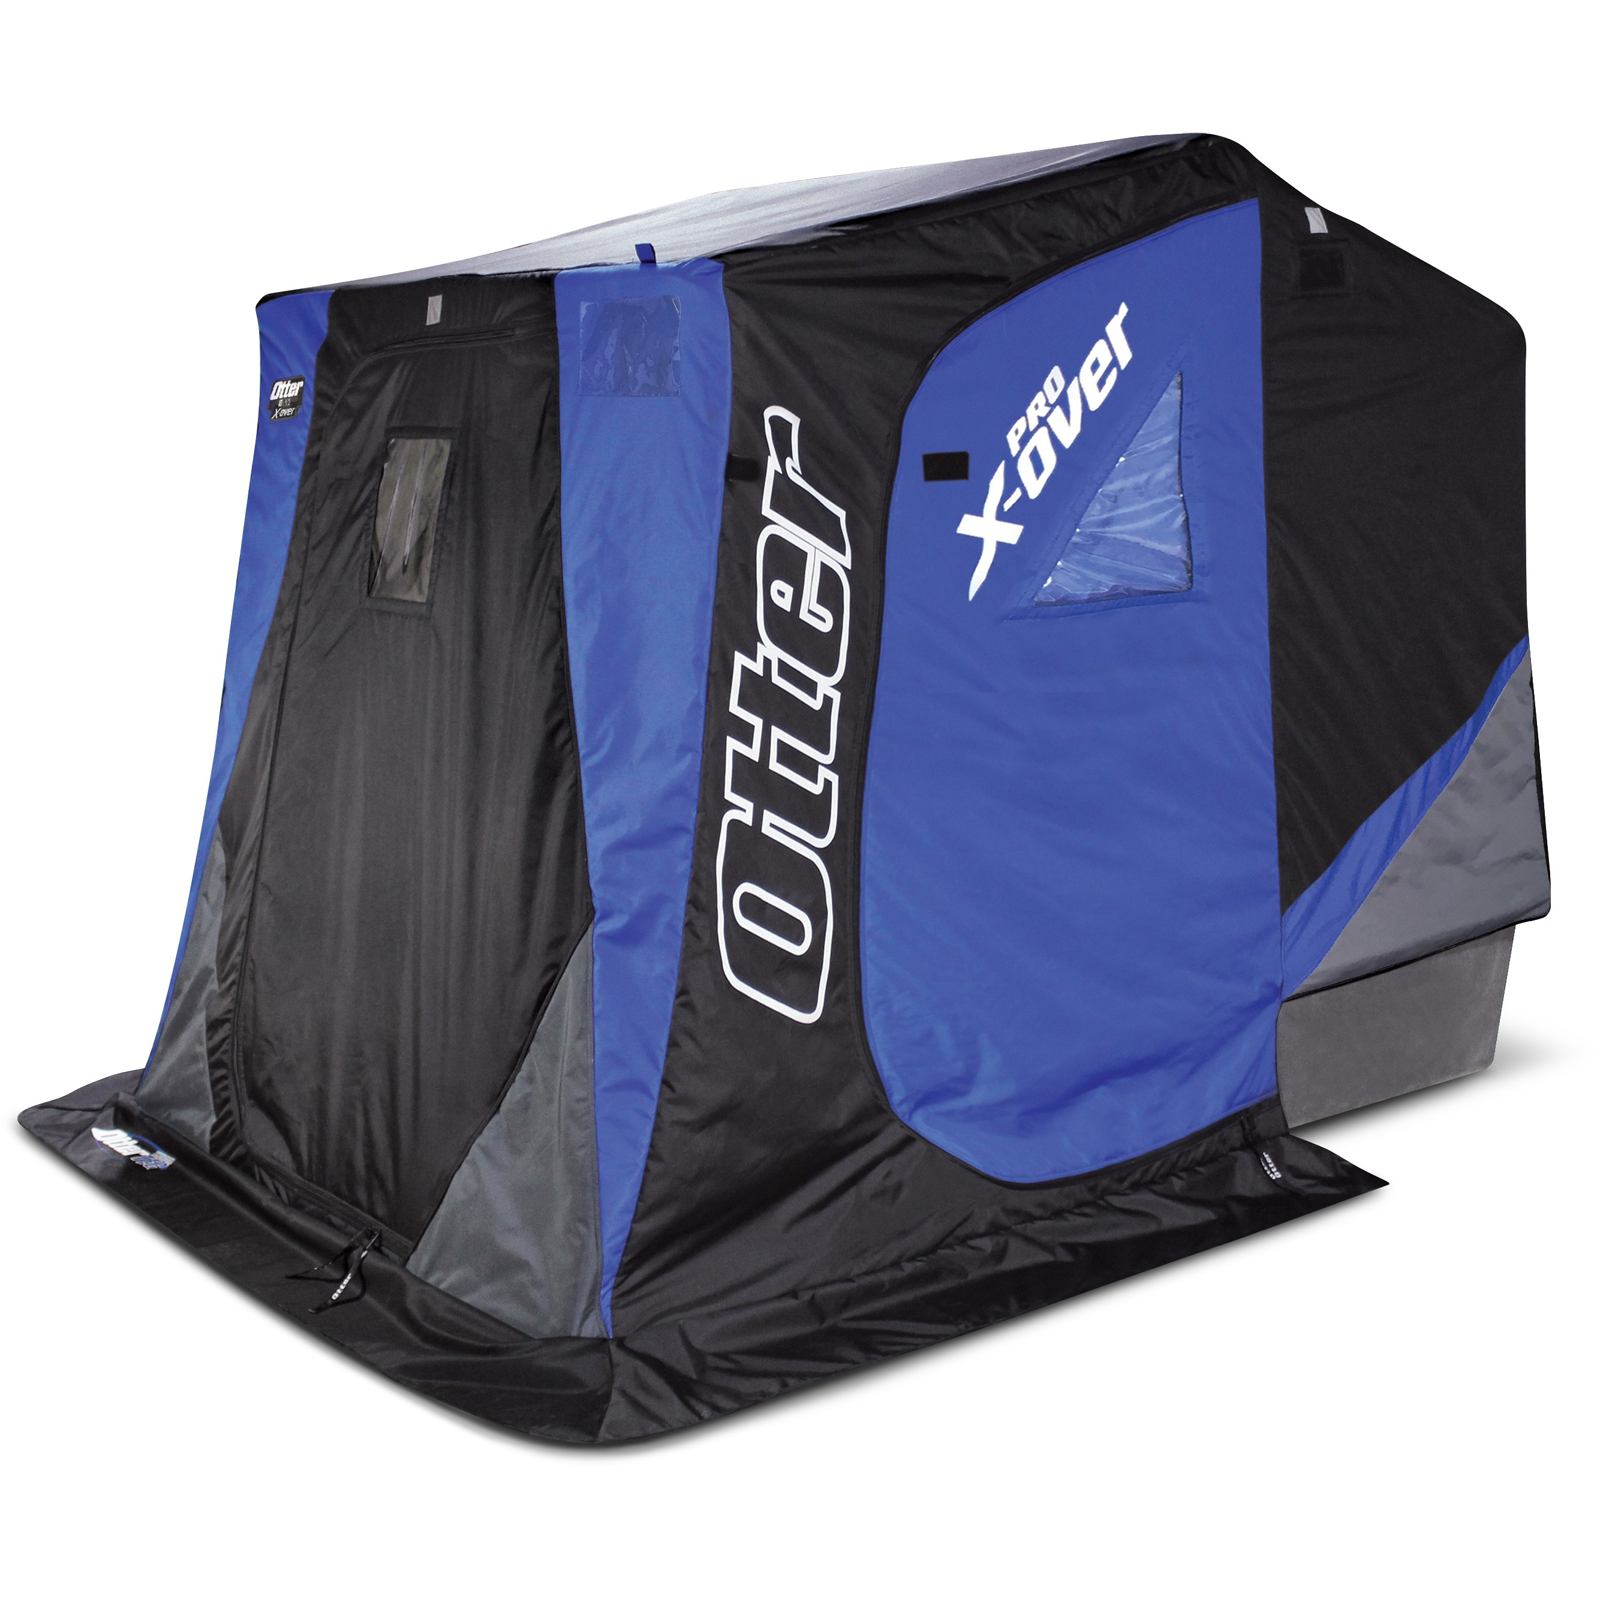 Great Portable Ice Fishing Shelters - In-Fisherman